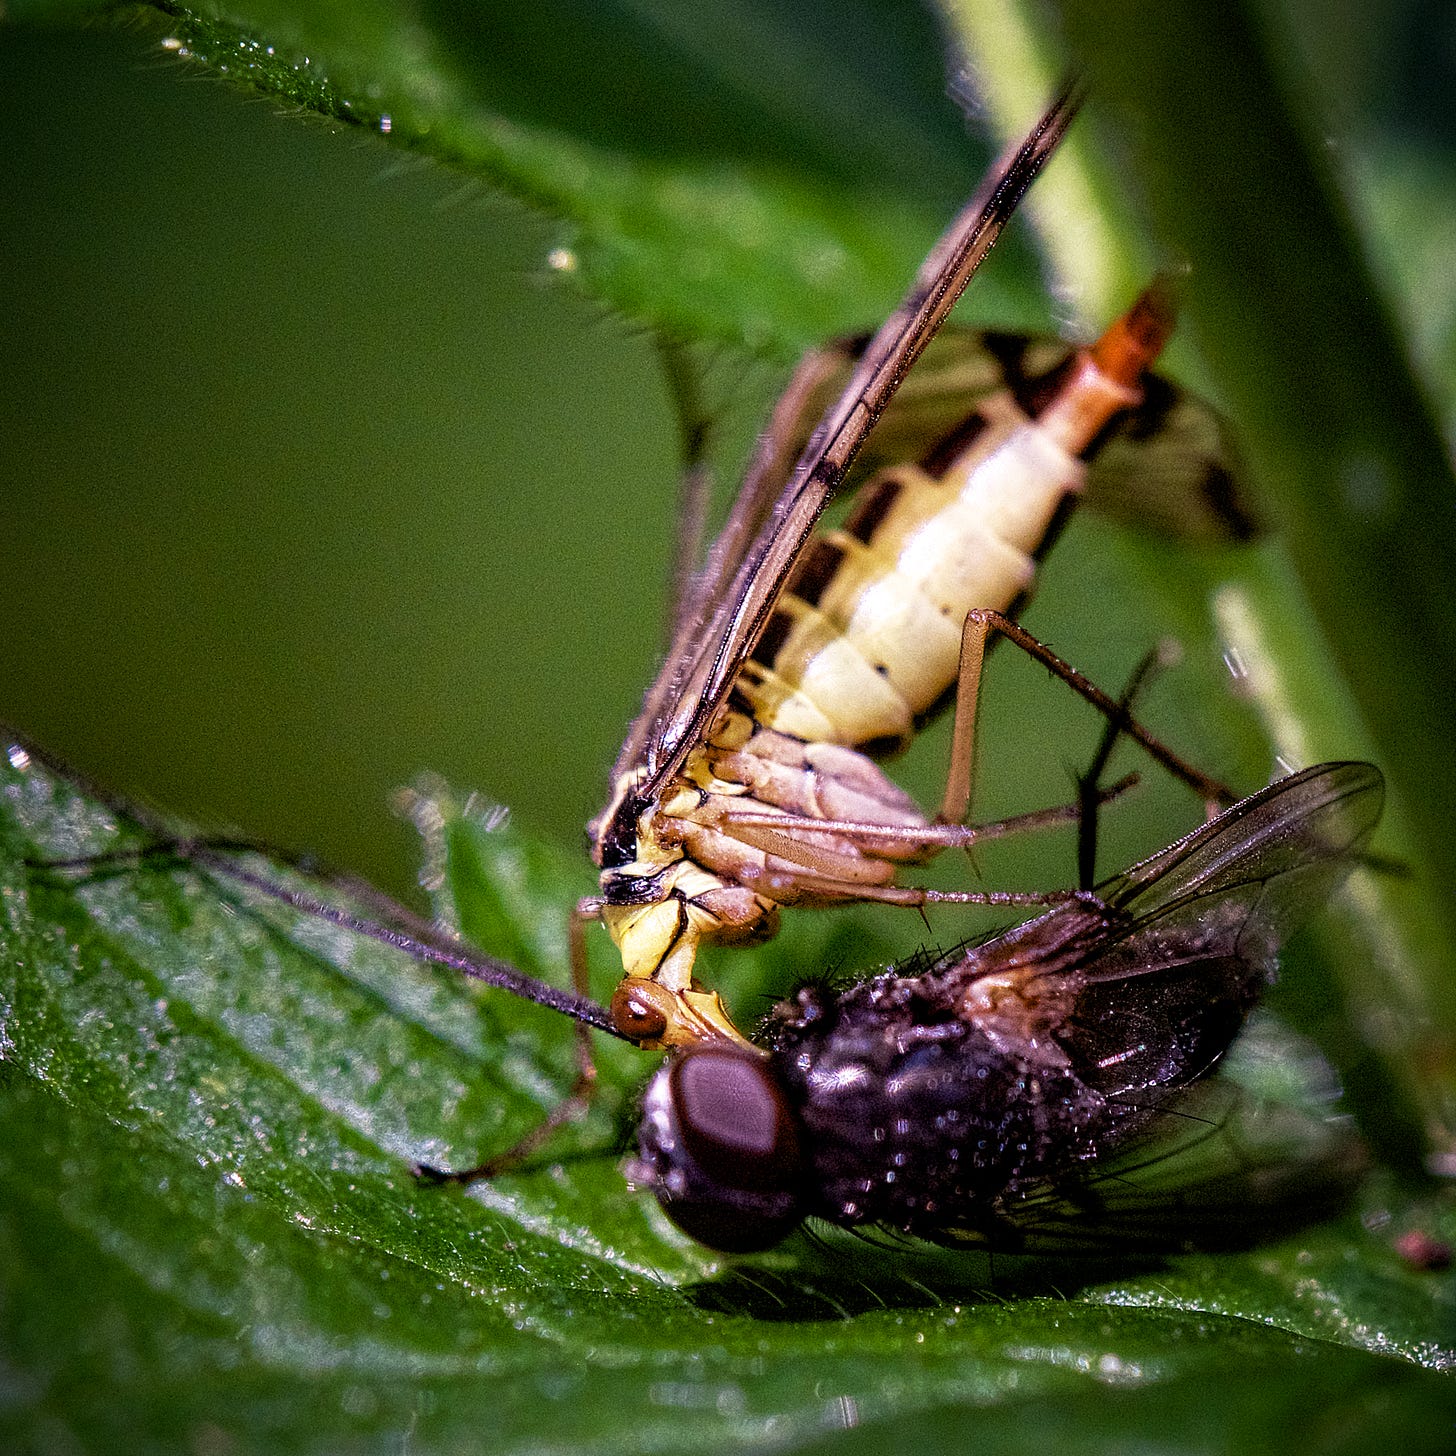 Scorpionfly eating dead fly